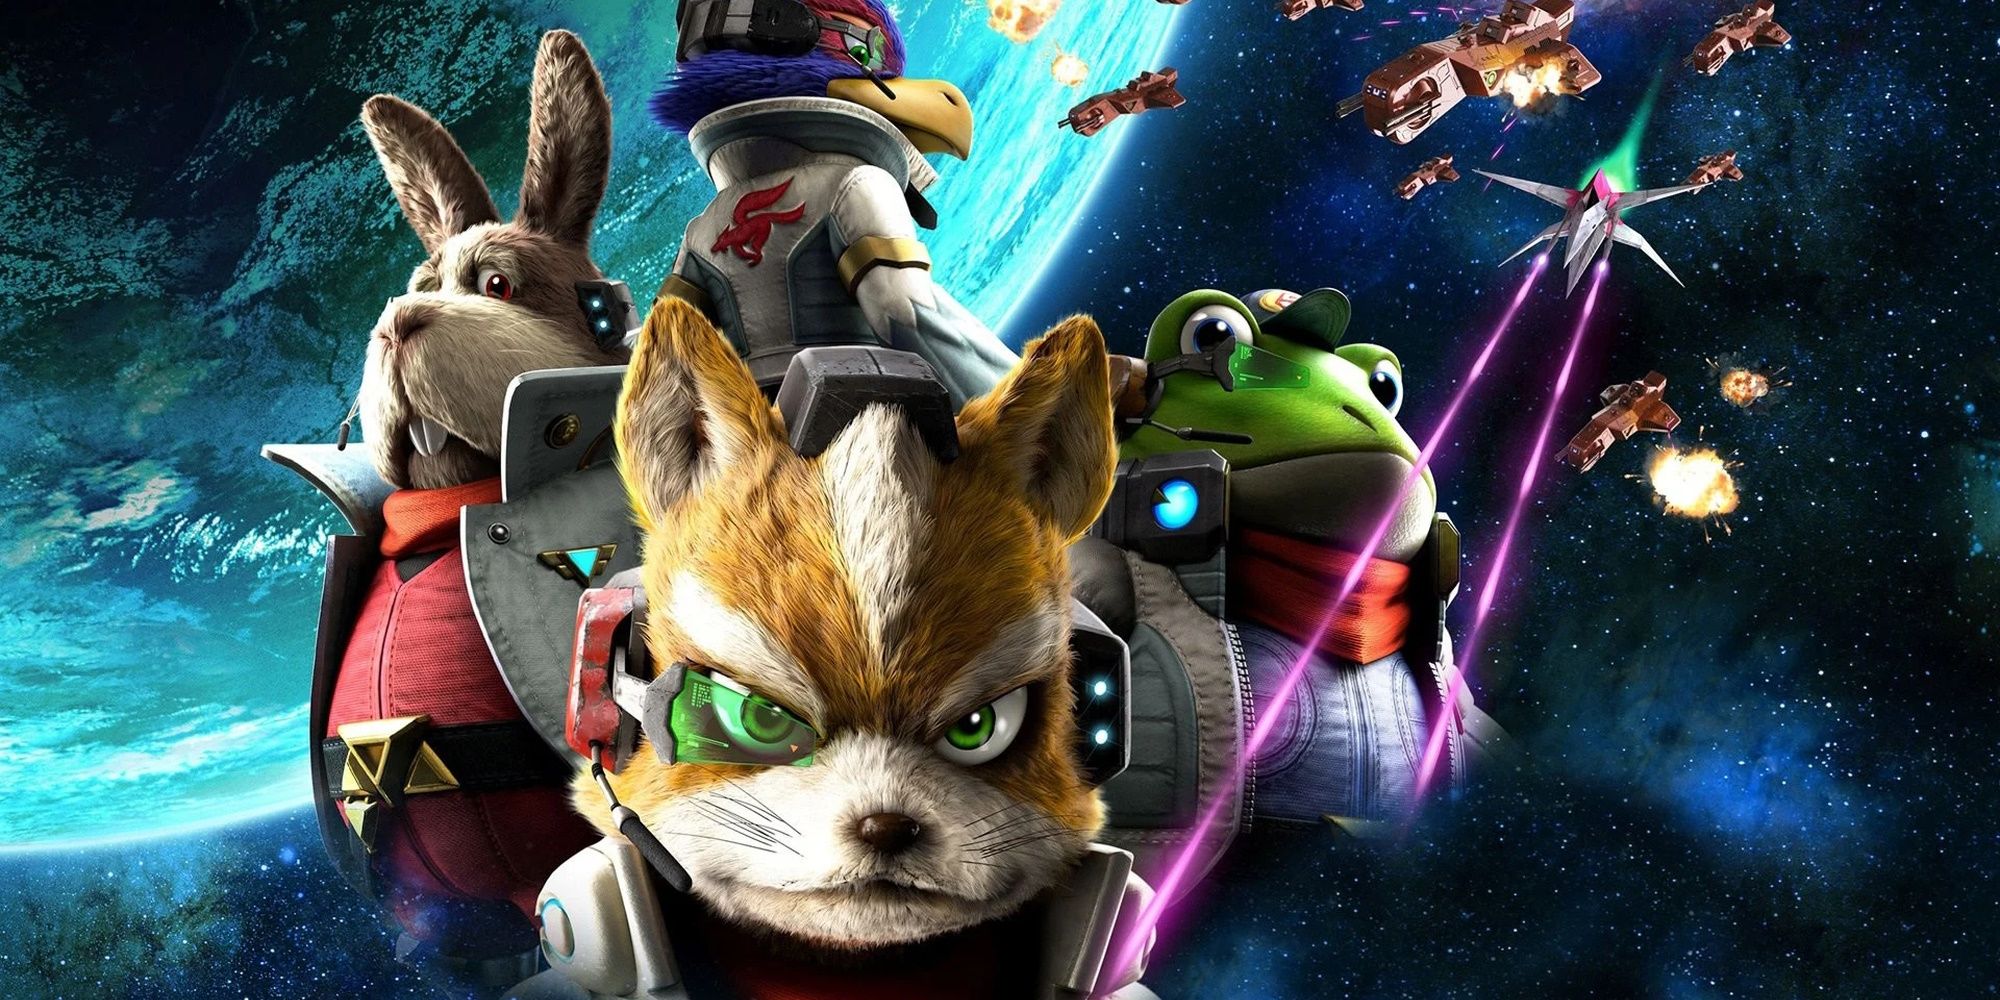 Star Fox Zero - Fox McColud, Falco Lombardi, Silppy Toad, And Peppy Hare In Space with Star Wolf Shooting At Them